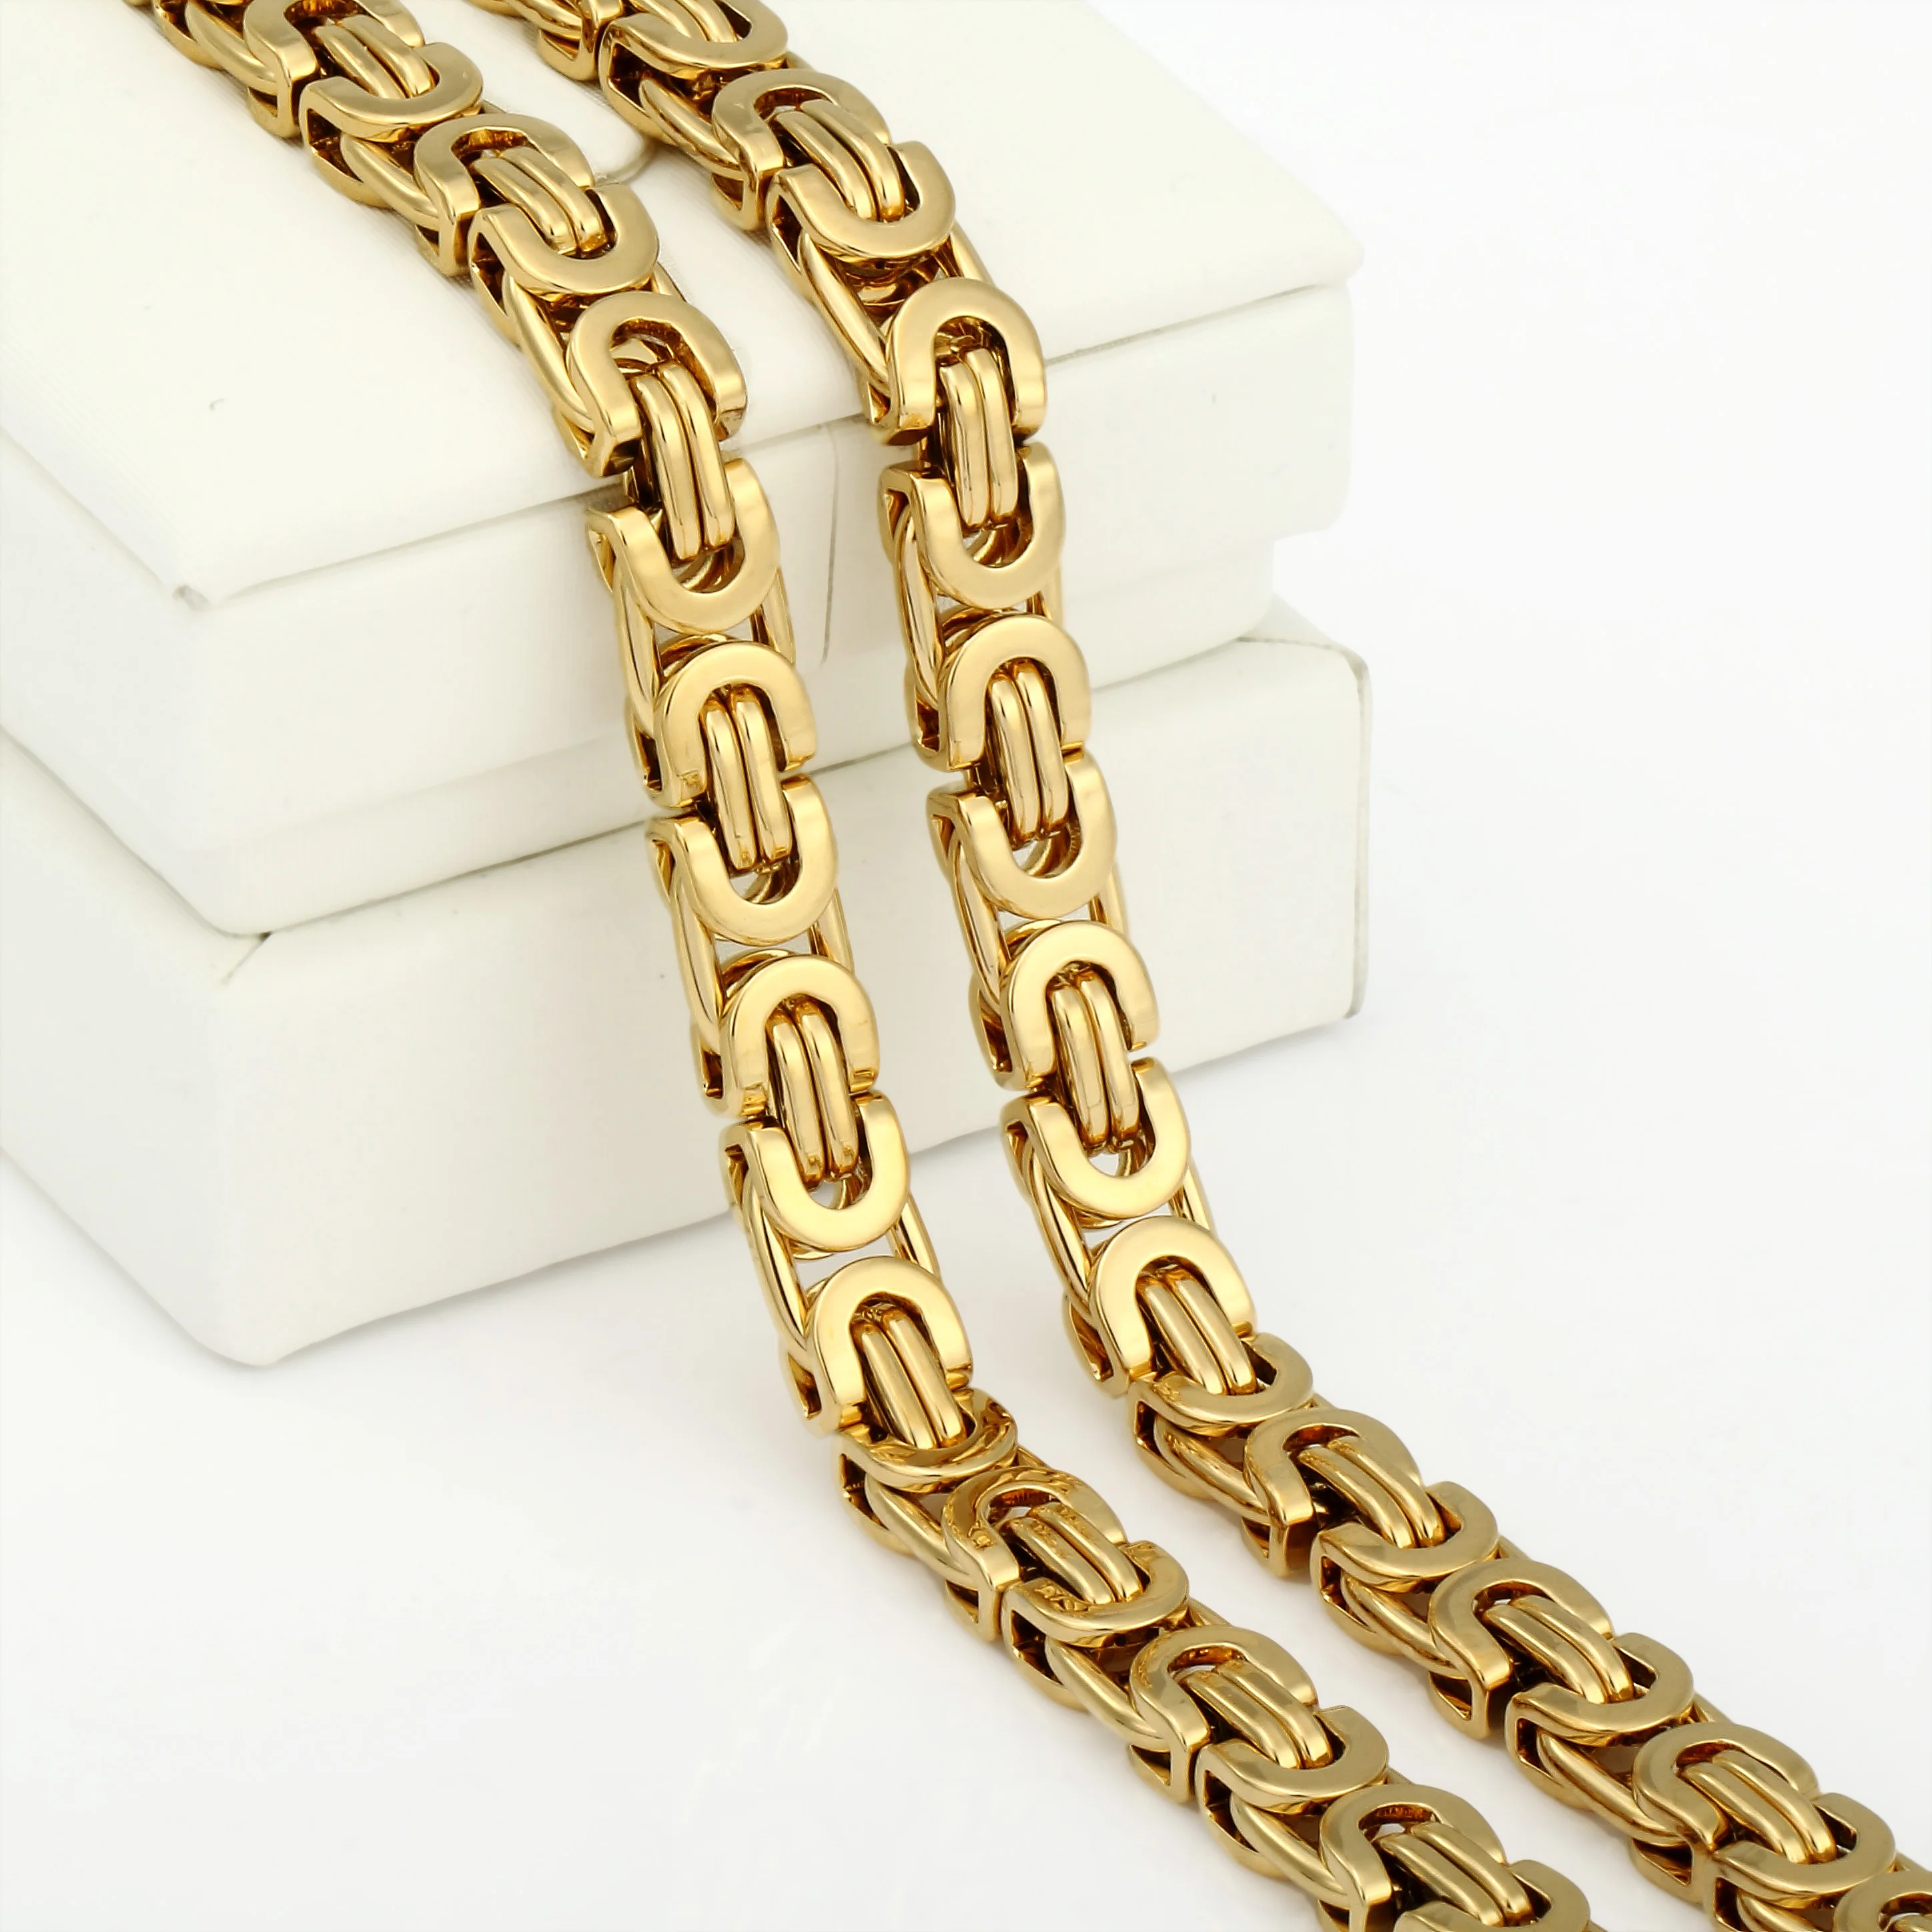 Men's 3.0mm Byzantine Chain Necklace in Solid 14K Gold - 22